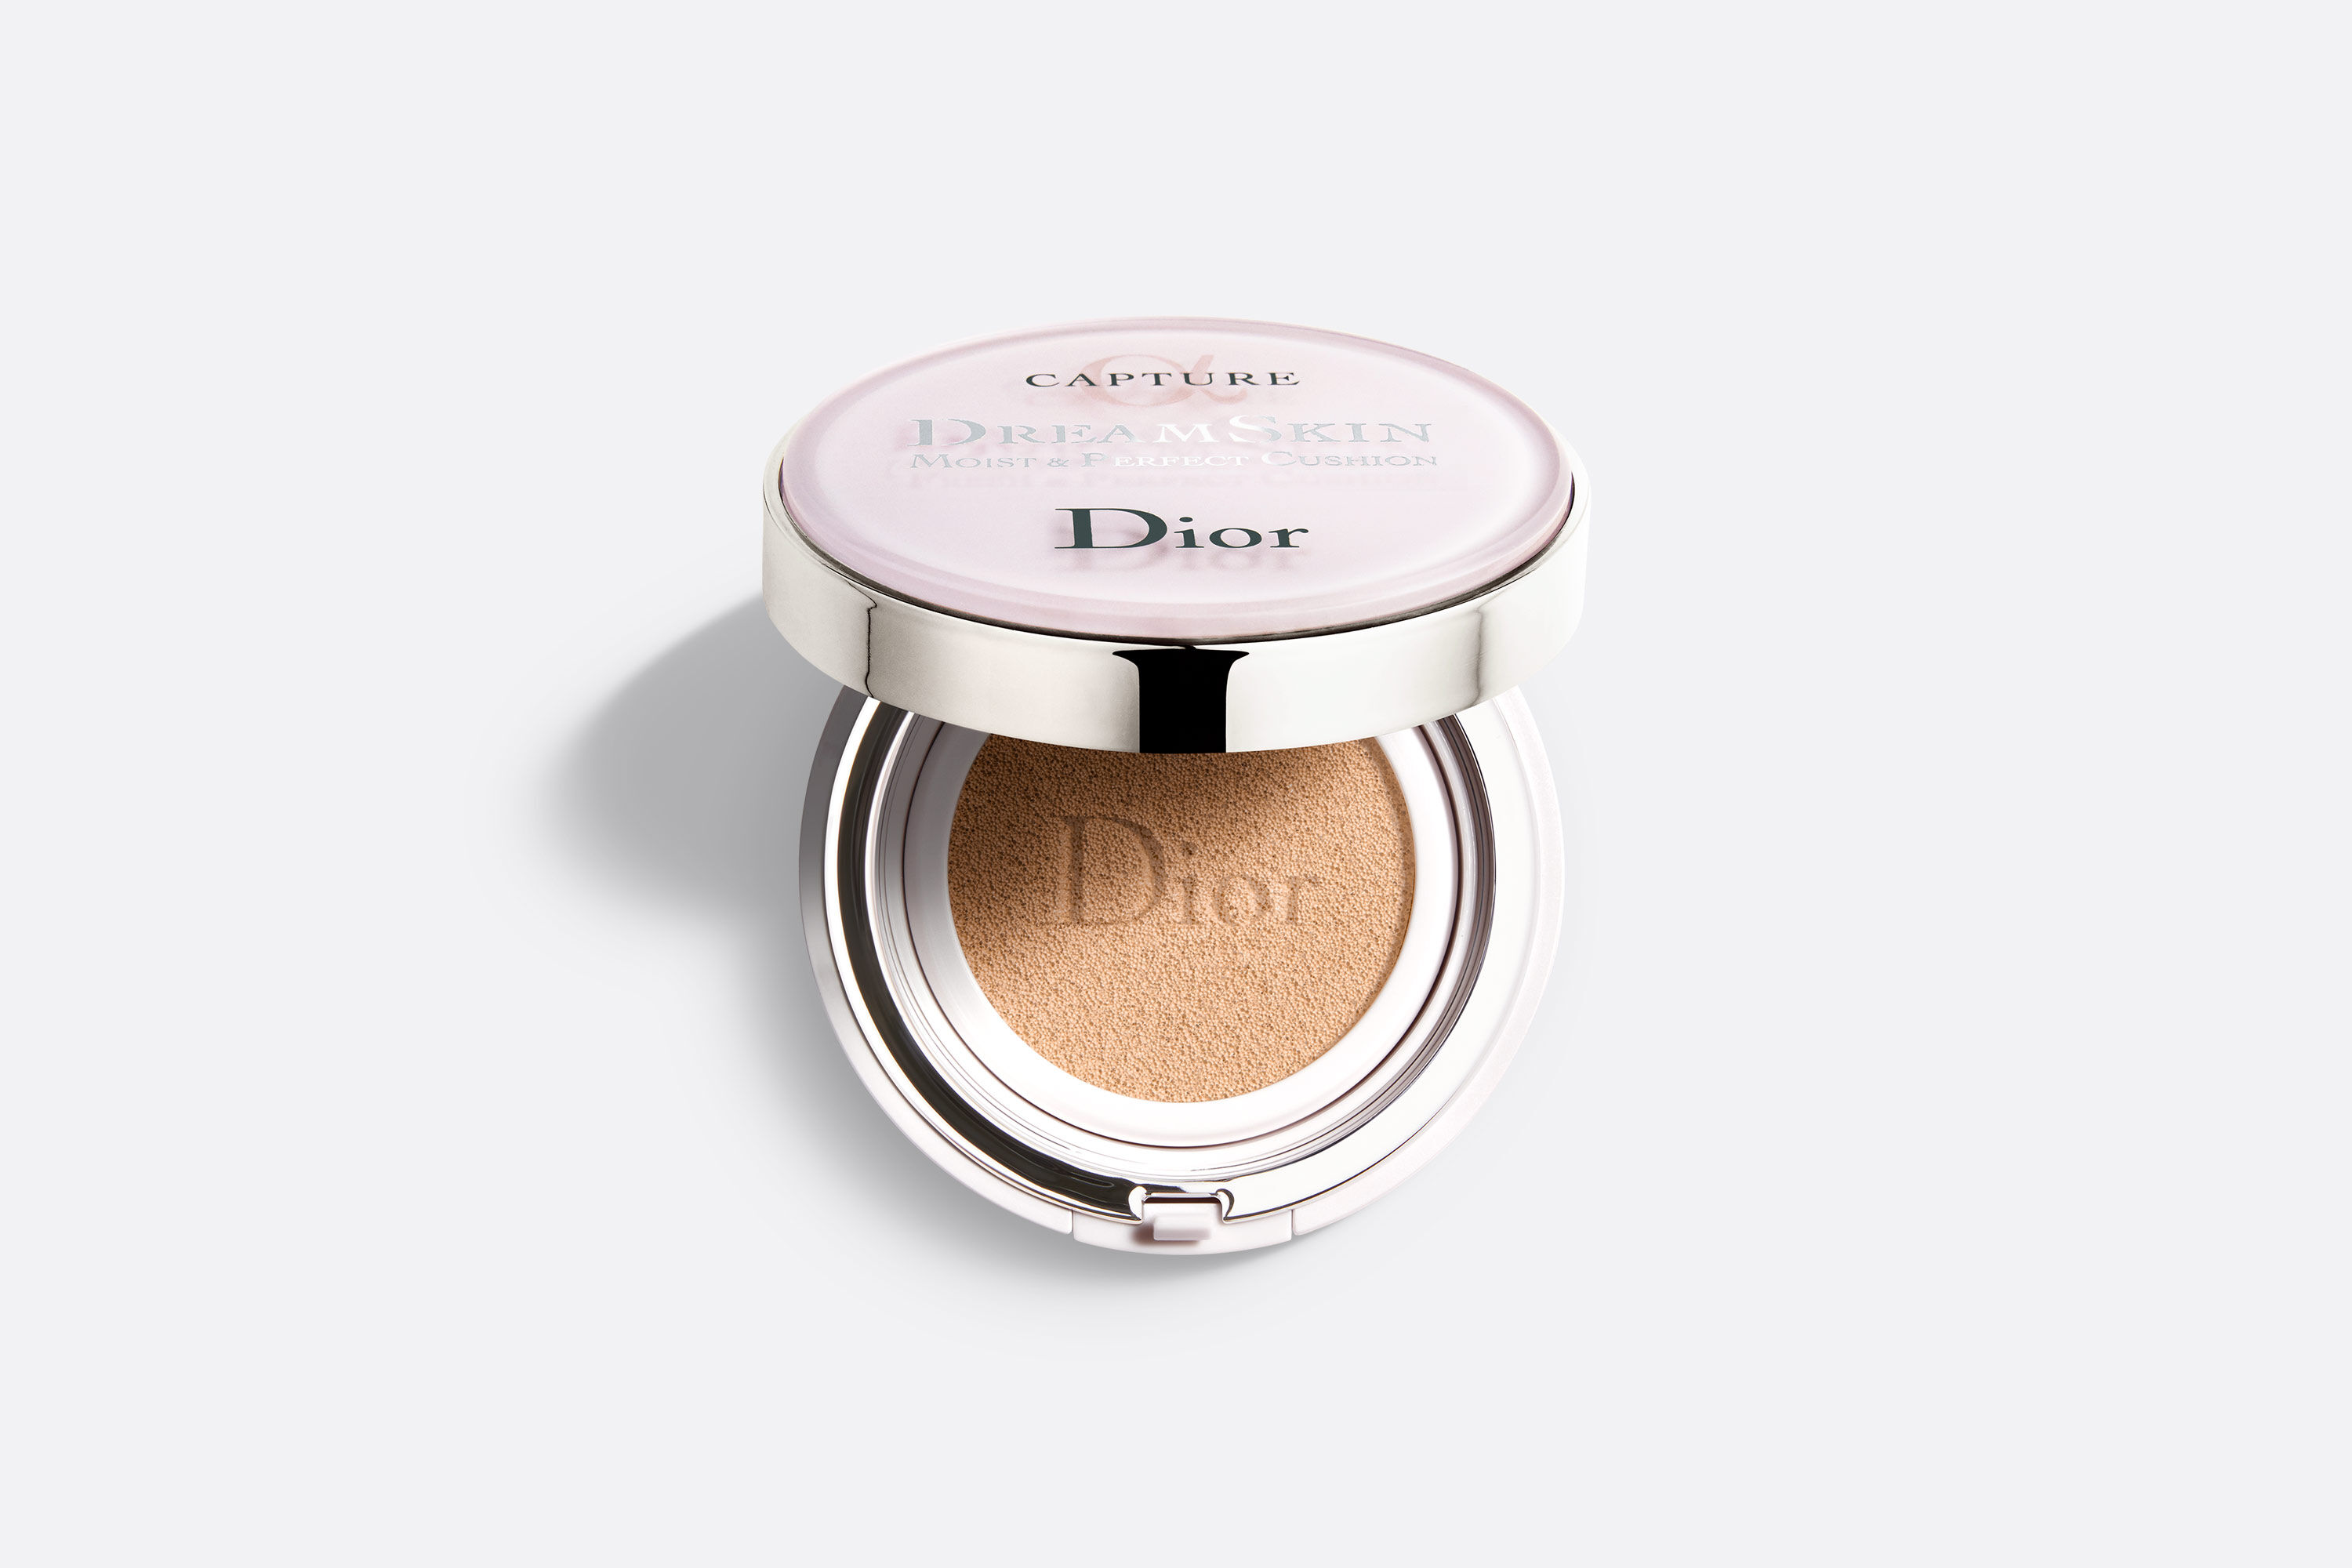 Dior  Capture Dreamskin Fresh  Perfect Cushion Review and Swatches  The  Happy Sloths Beauty Makeup and Skincare Blog with Reviews and Swatches